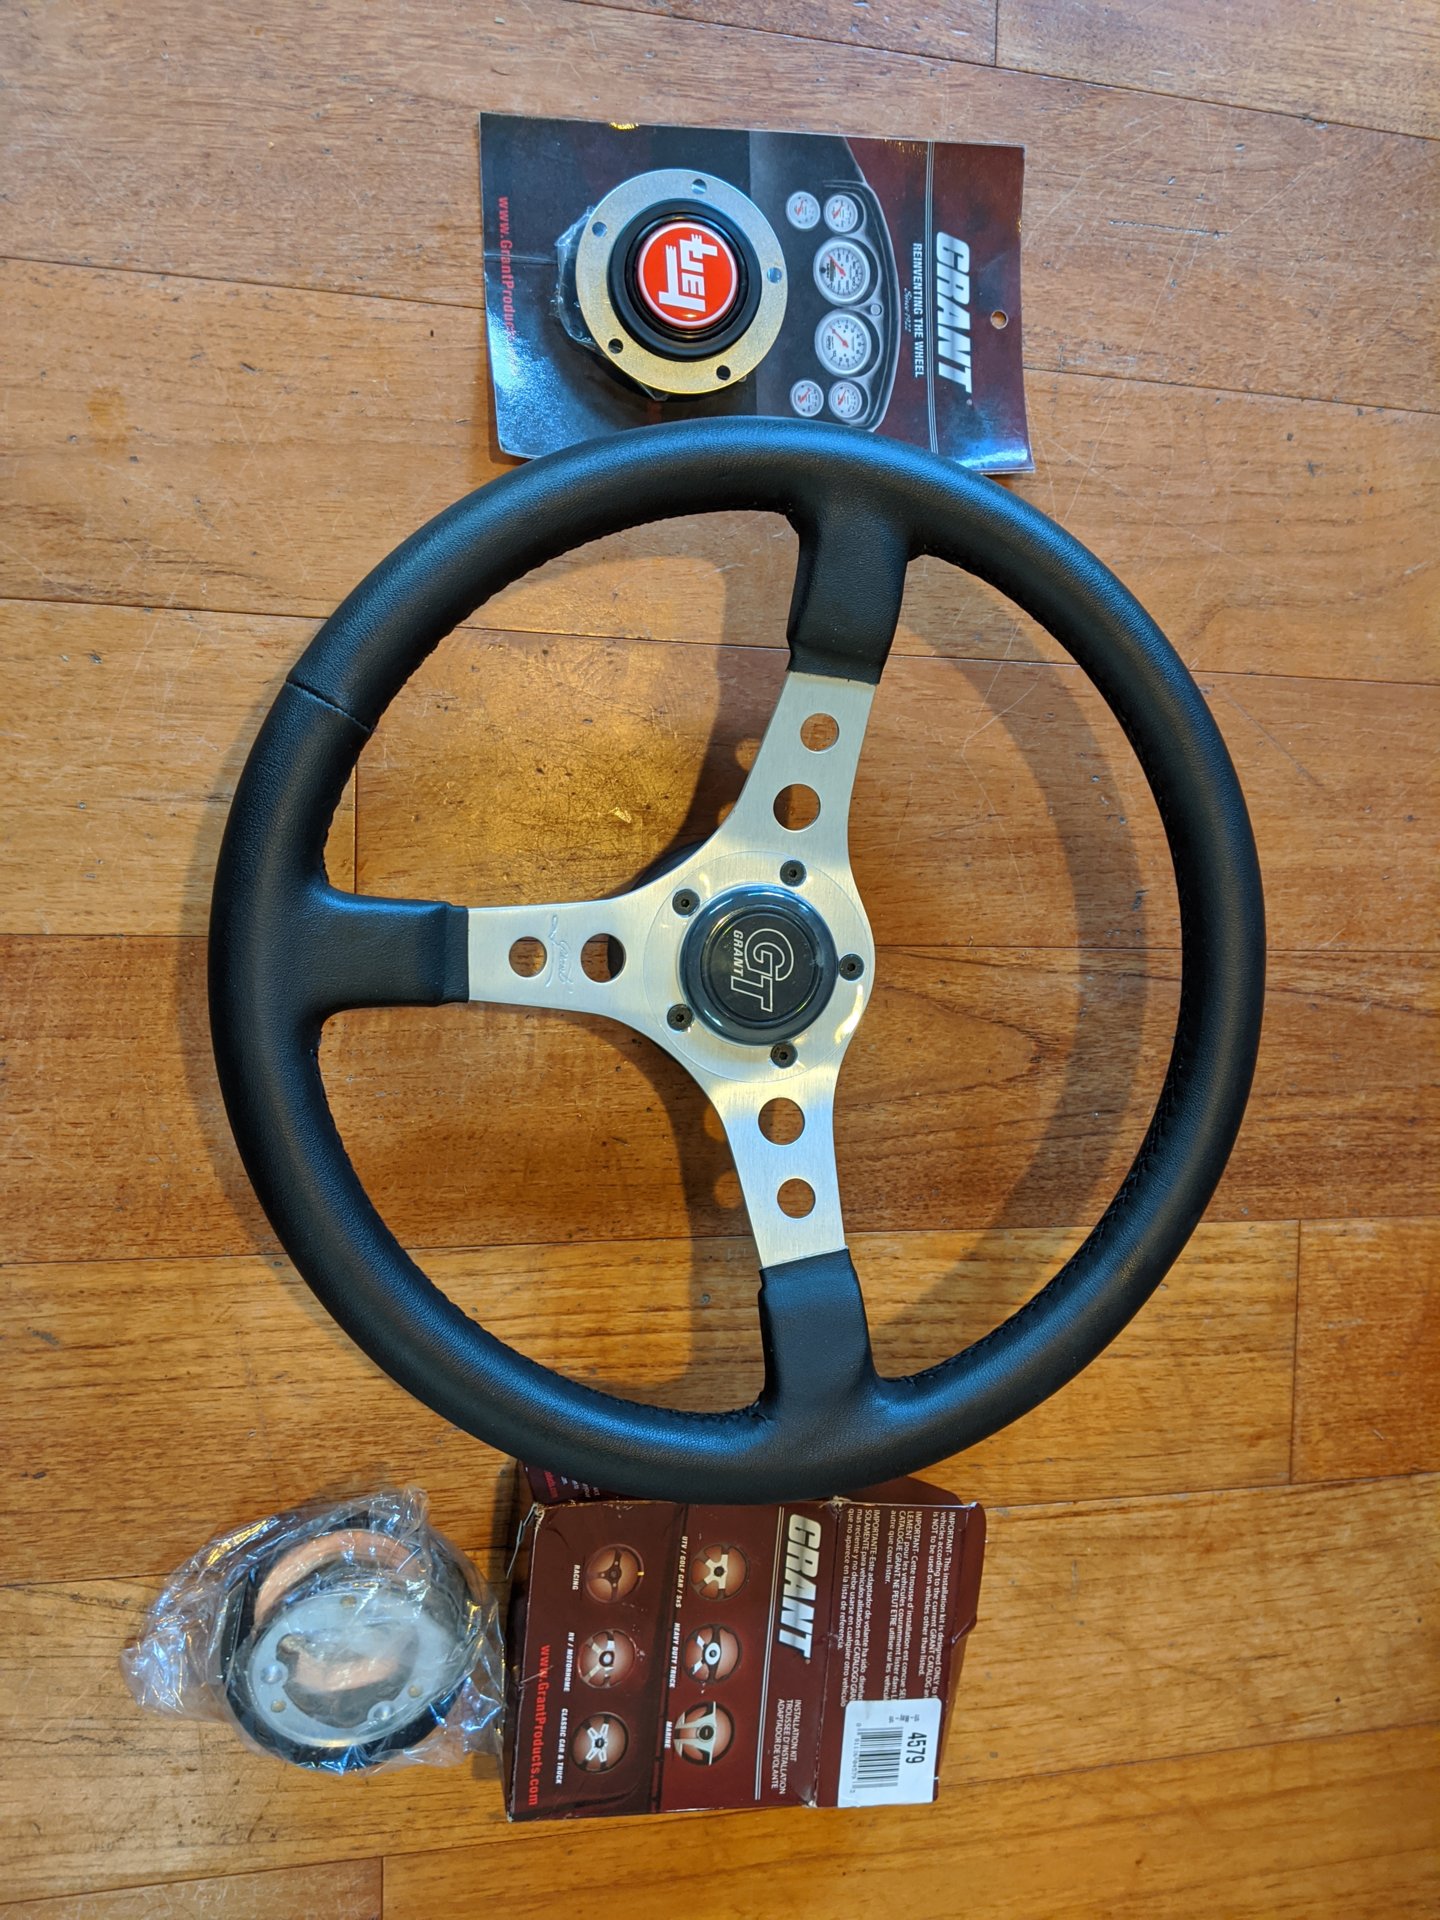 Grant Products 1760 Formula GT Wheel 